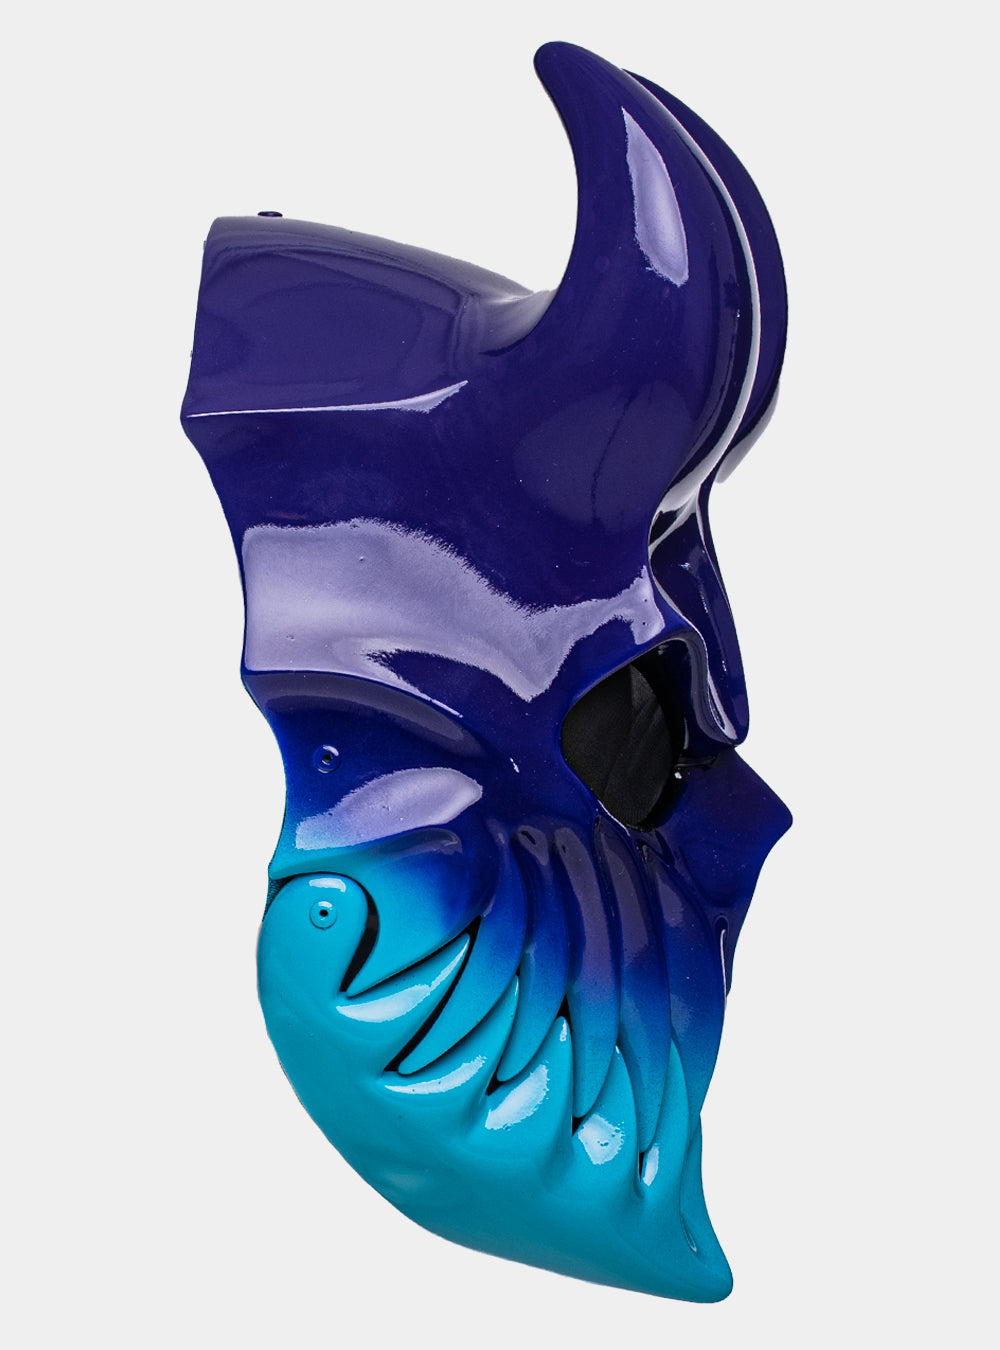 (SLAUGHTER TO PREVAIL) ALEX TERRIBLE MASK “KID OF DARKNESS” (COLD ICE)